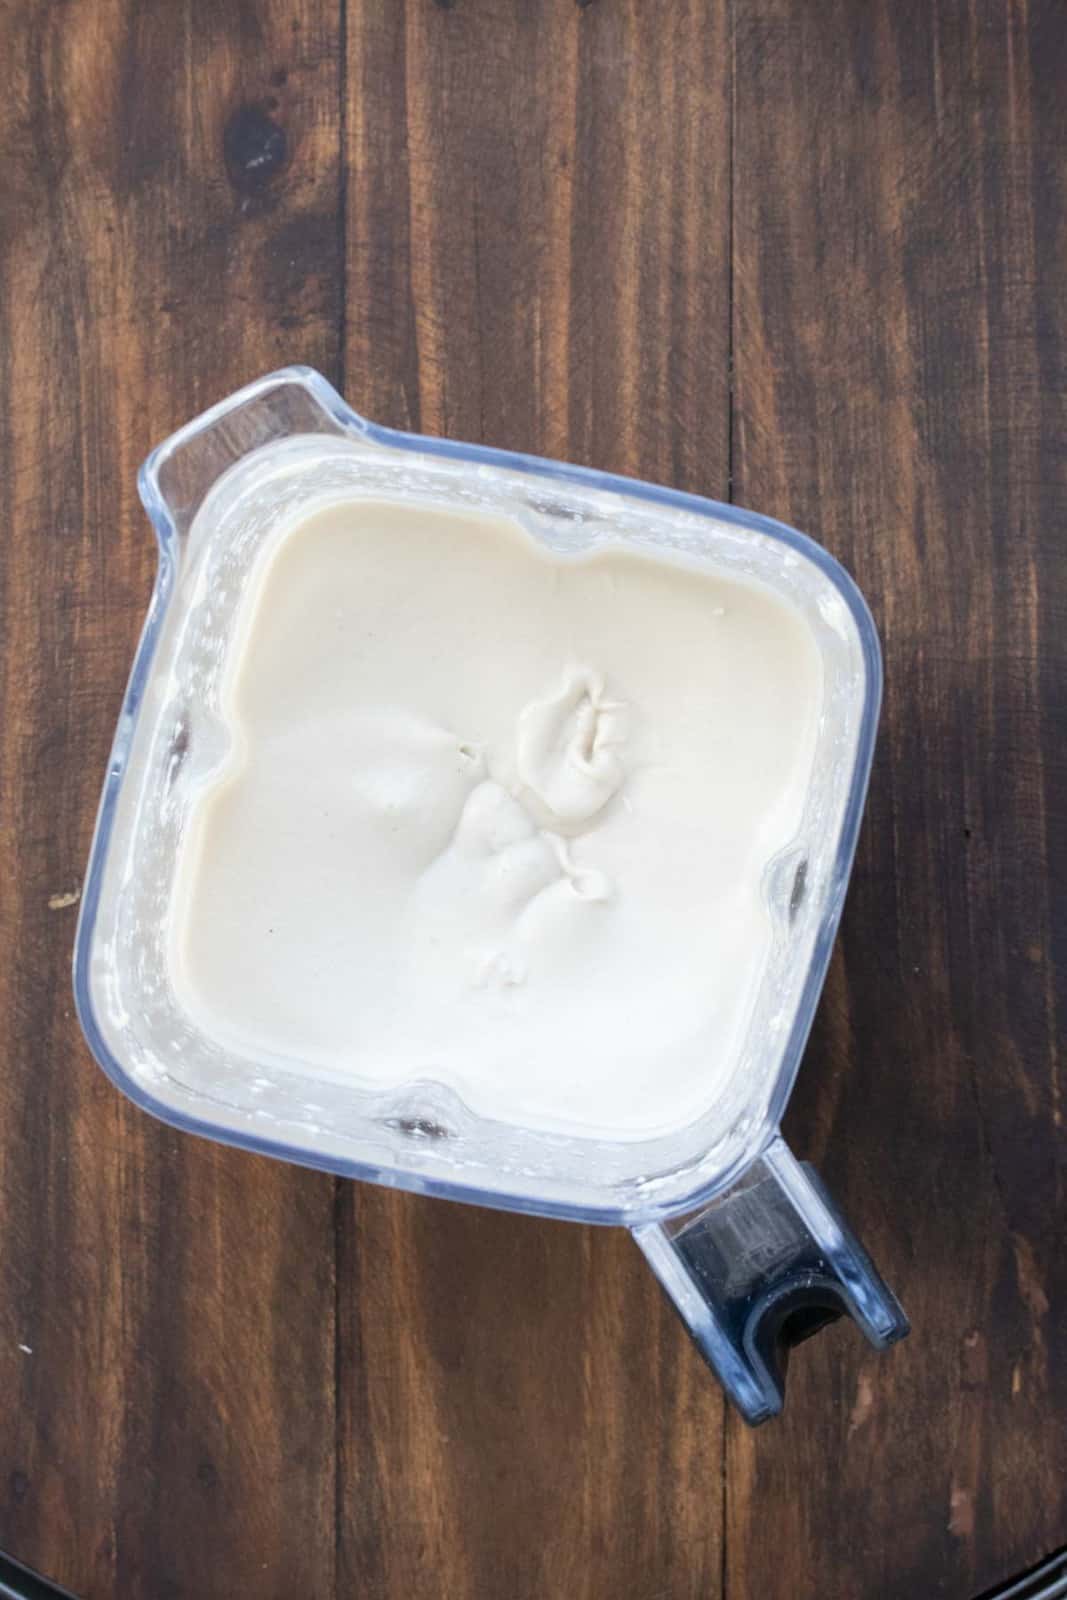 Top view of a blender with tahini sauce in it